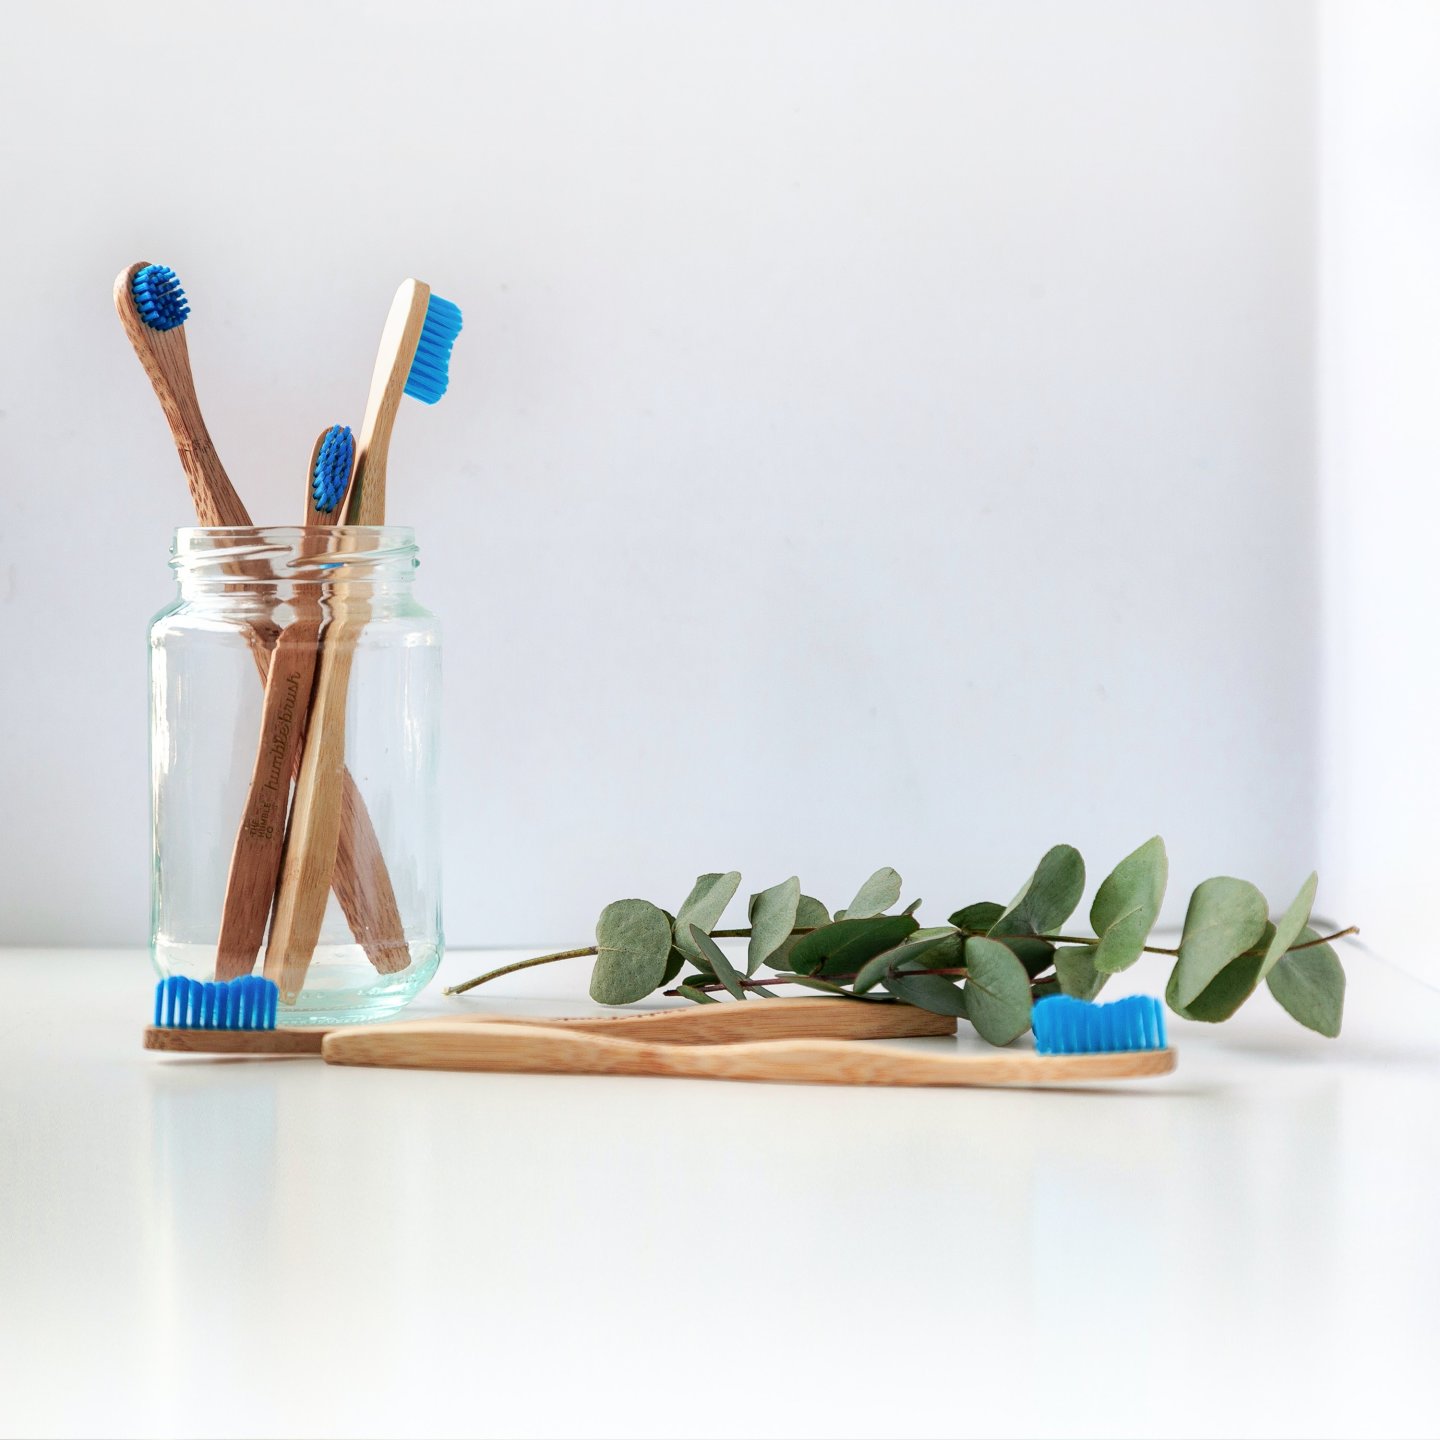 Toothbrushes with wooden handles placed in a clear jar and on the table